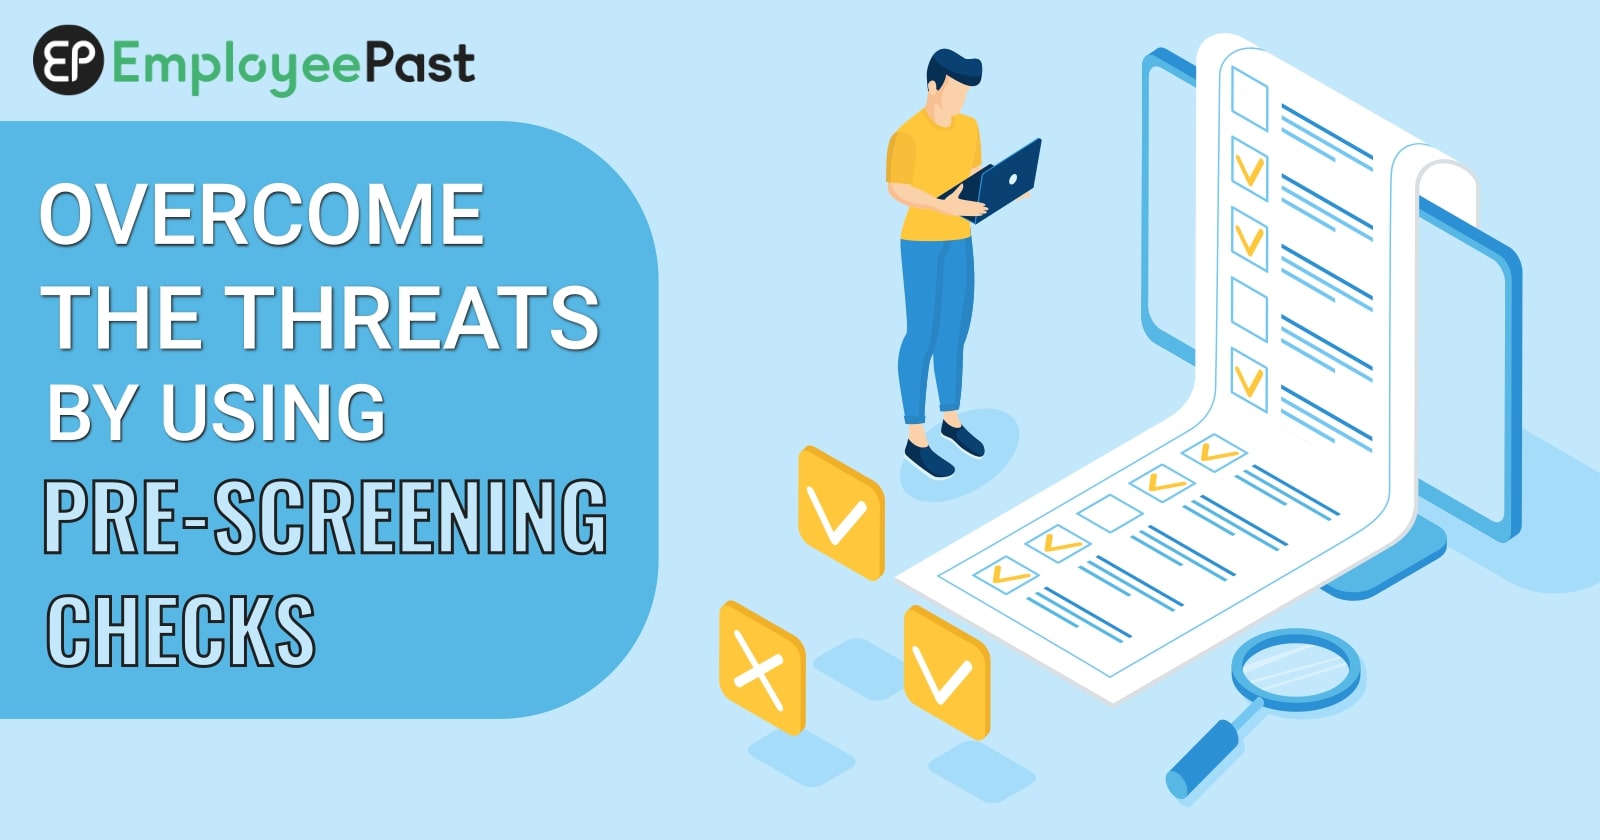 Overcome The Threats By Using Pre-Screening Checks